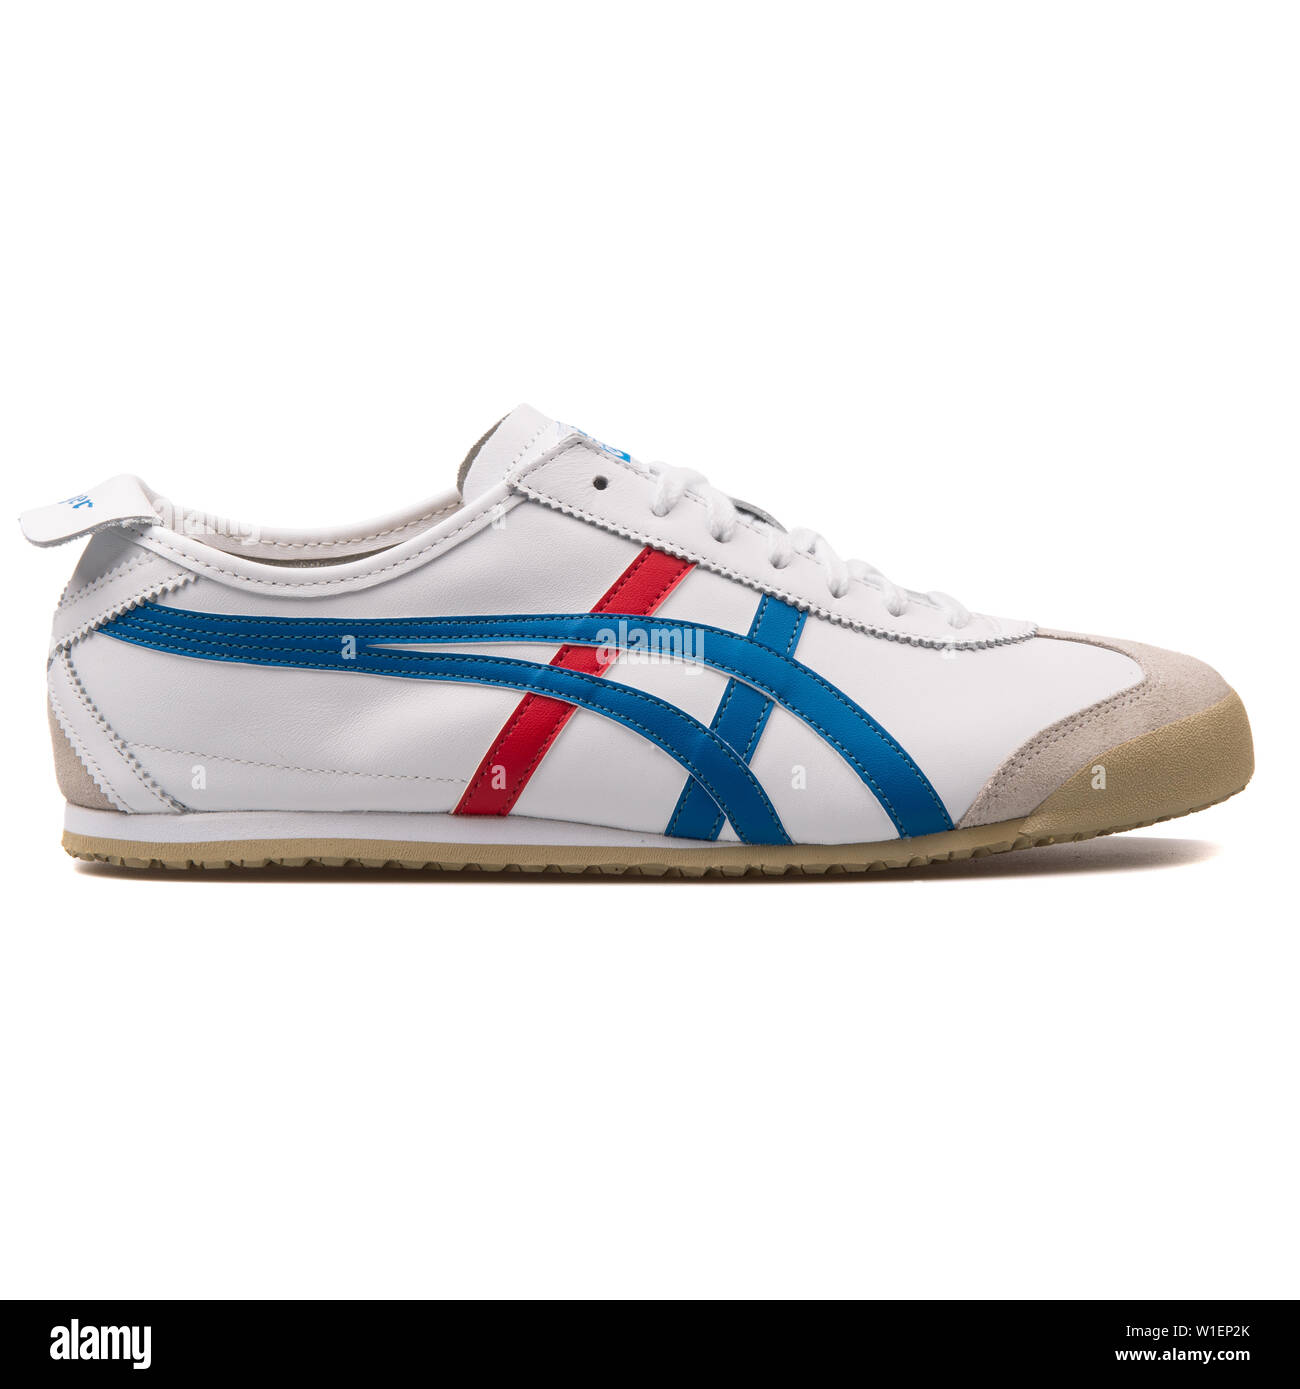 Onitsuka Tiger Mexico 66 white and blue 